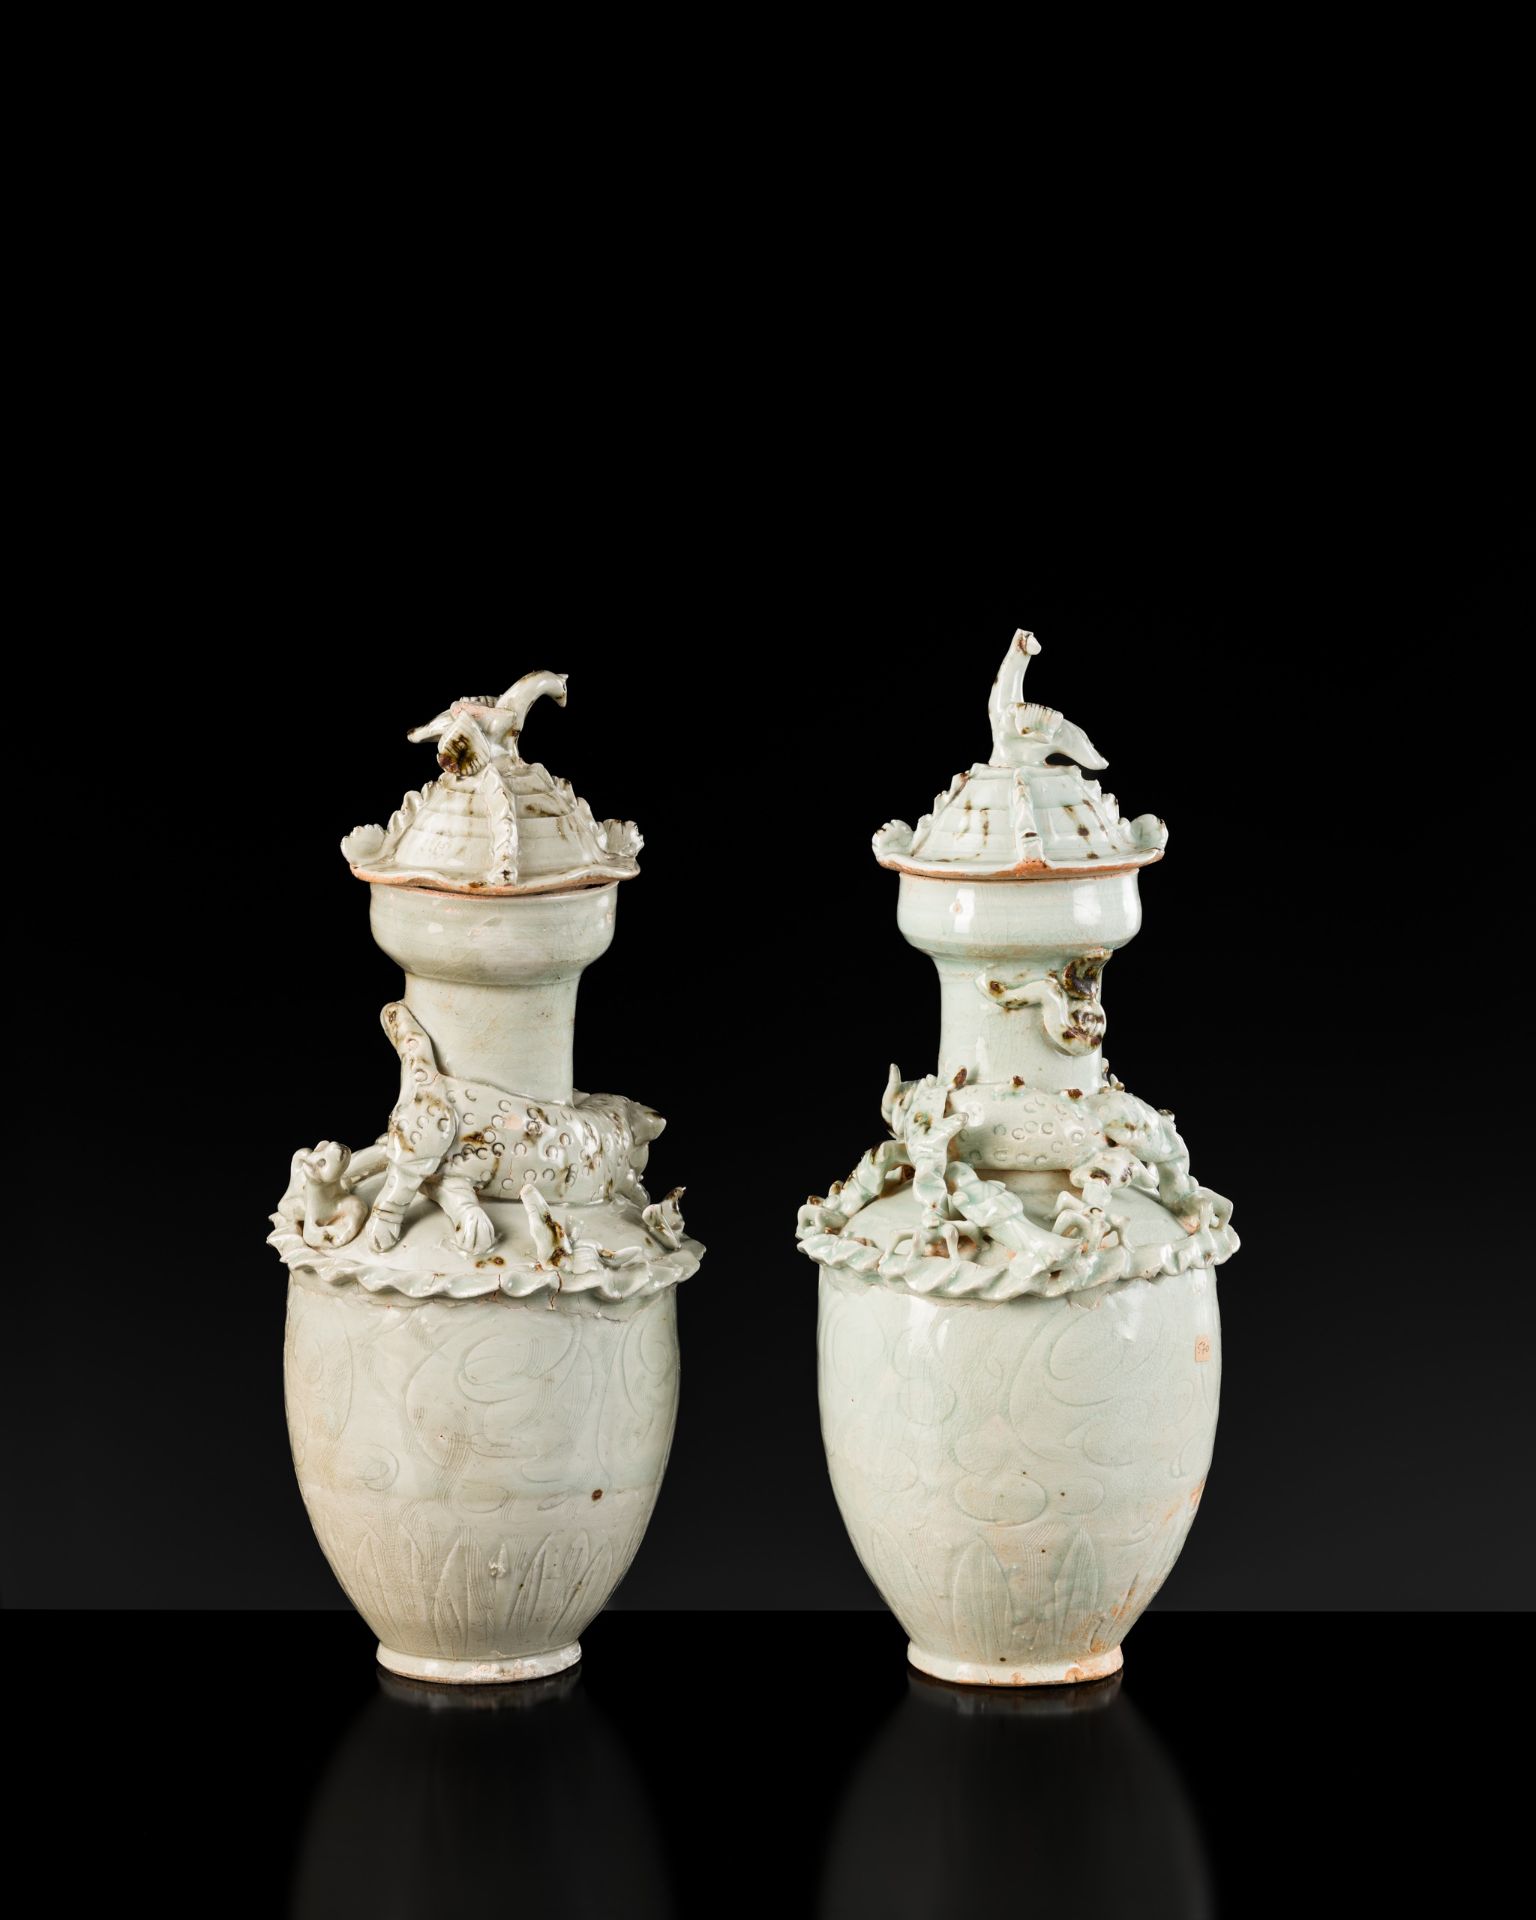 A PAIR OF QINGBAI FUNERARY JARS AND COVERS, SONG DYNASTY - Image 9 of 12